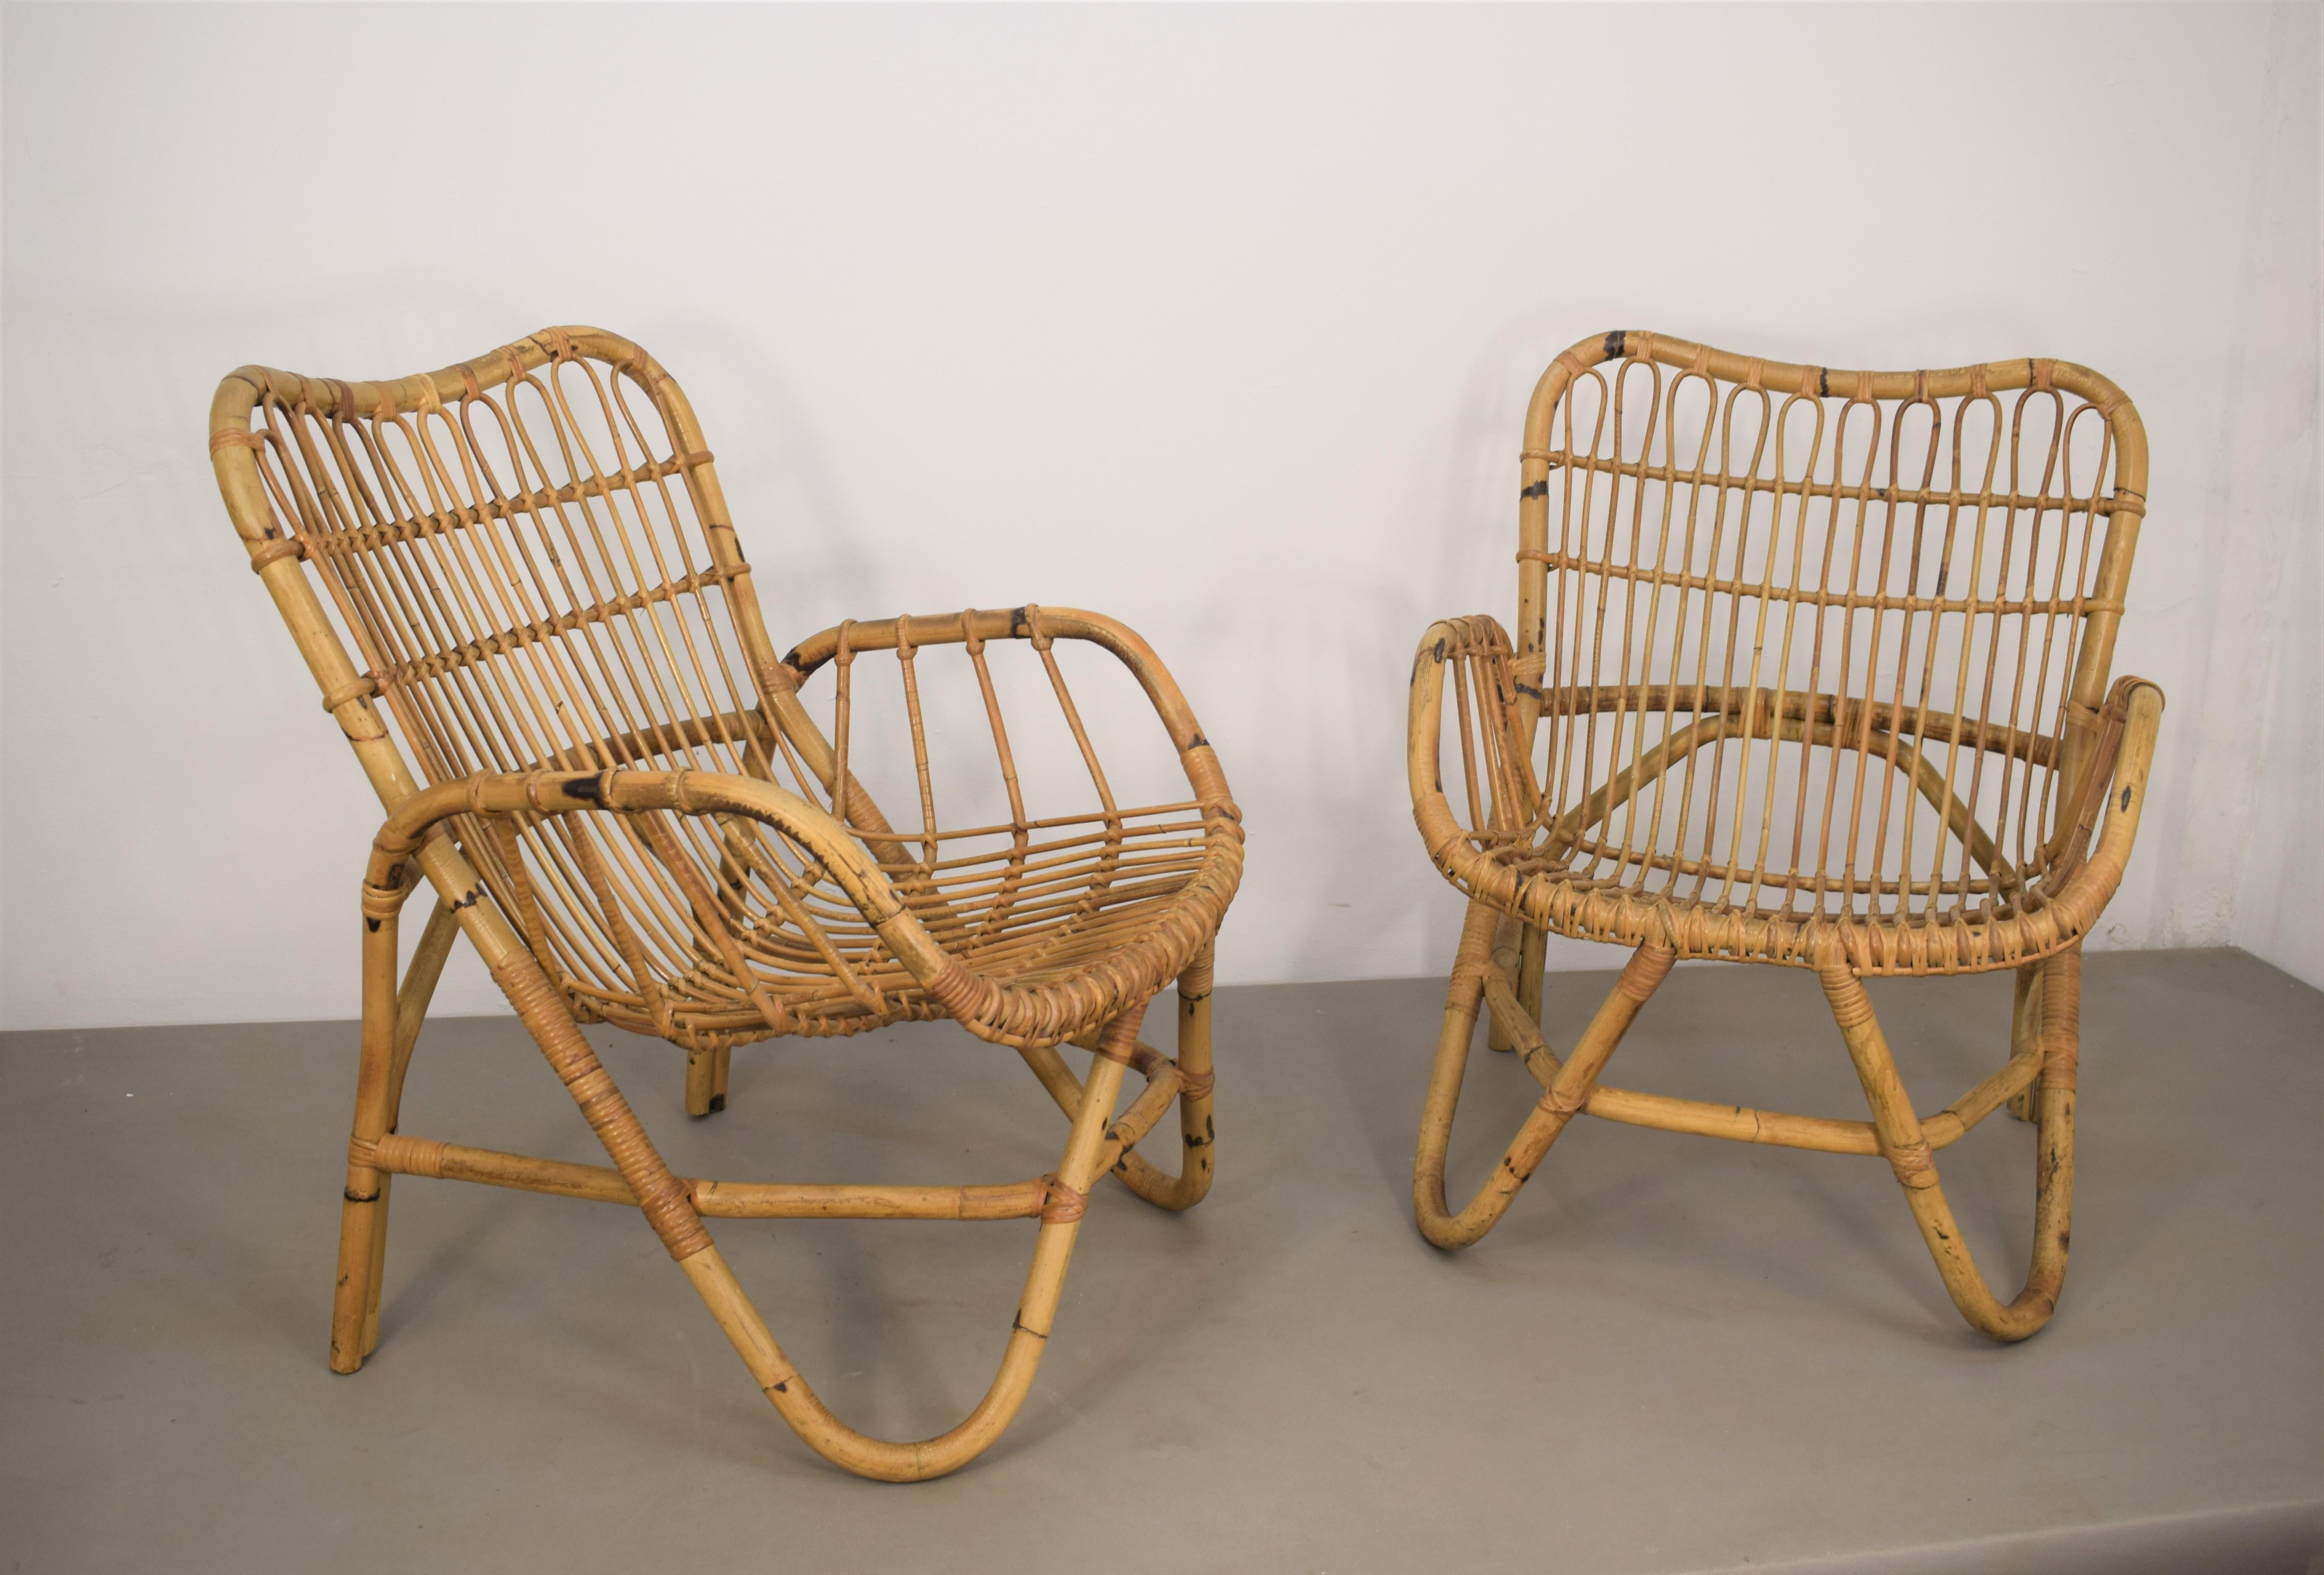 Pair of Italian bamboo armchairs in the style of Tito Agnoli, 1960s.

Dimensions: H= 79 cm; W= 60 cm; D= 76 cm; Height seat = 39 cm.